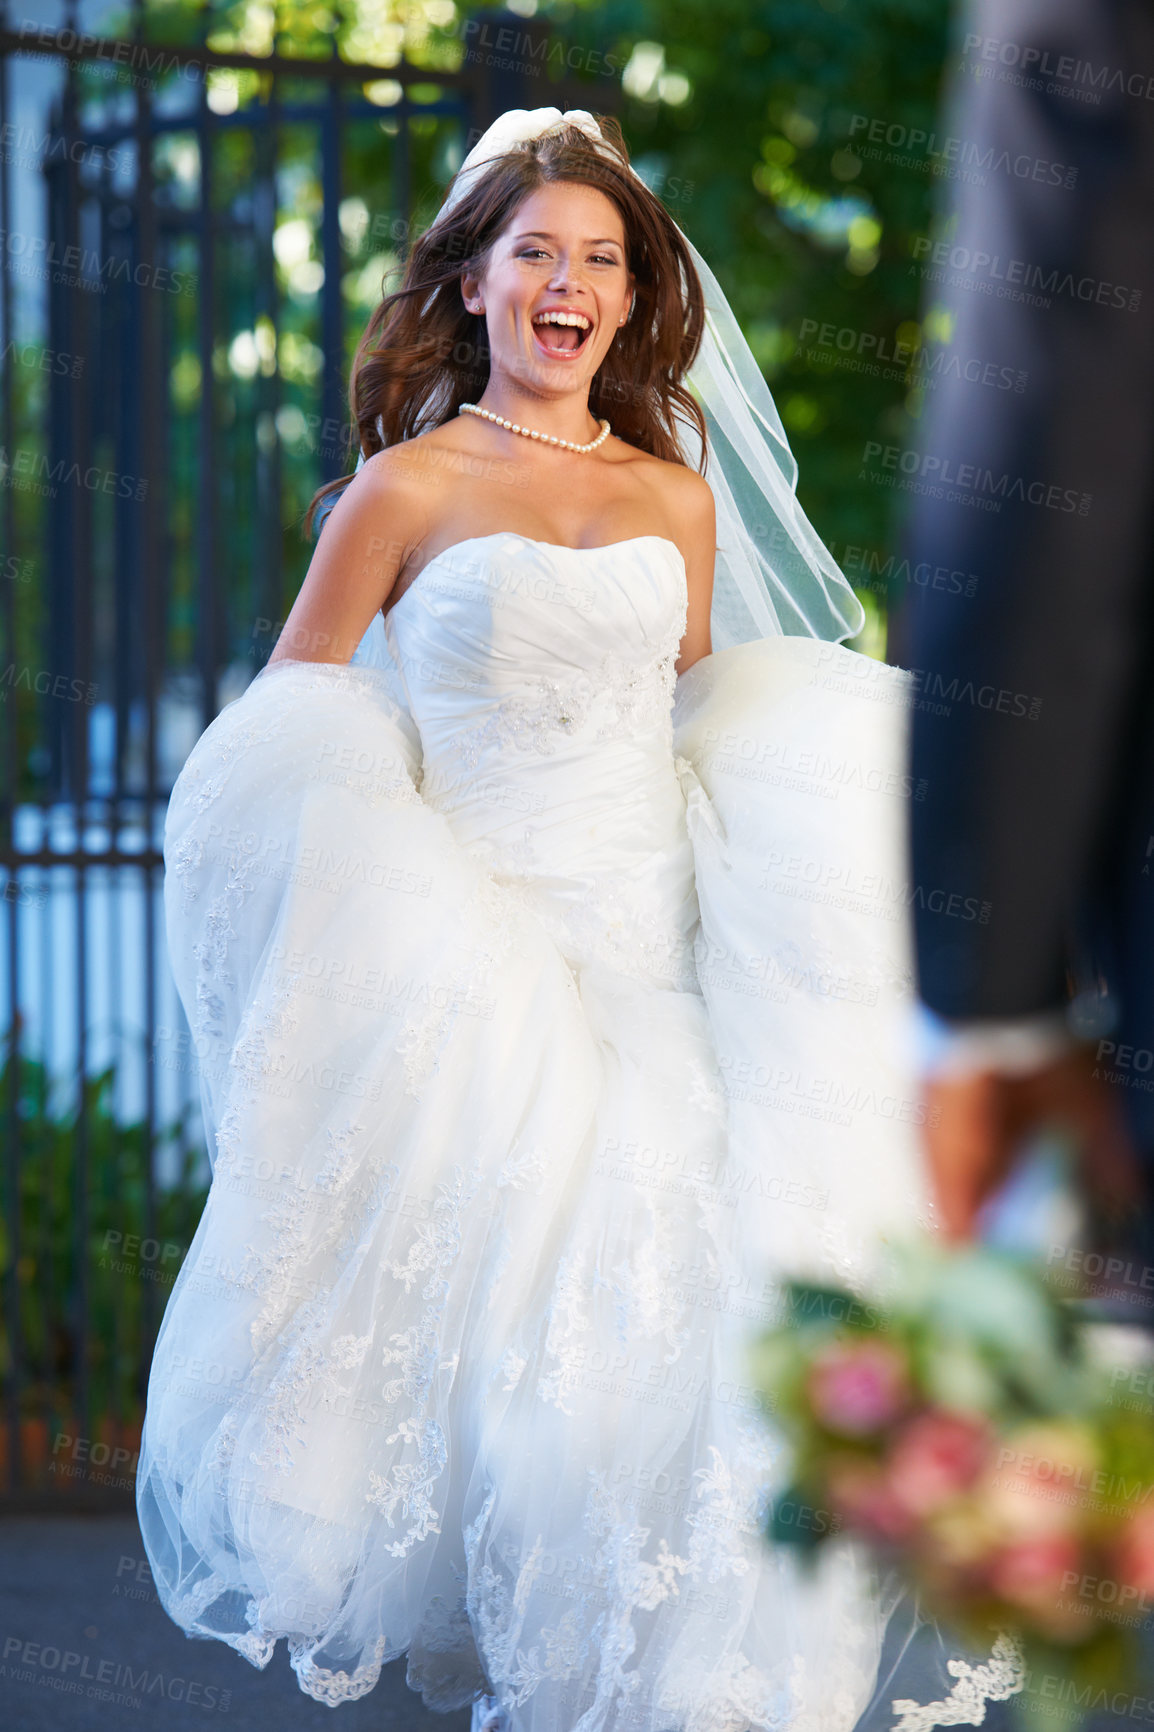 Buy stock photo Excited, bride with smile and running outside to groom with flowers, love and marriage celebration. Happiness, commitment and woman in wedding dress with partner, bouquet and romance at reception.